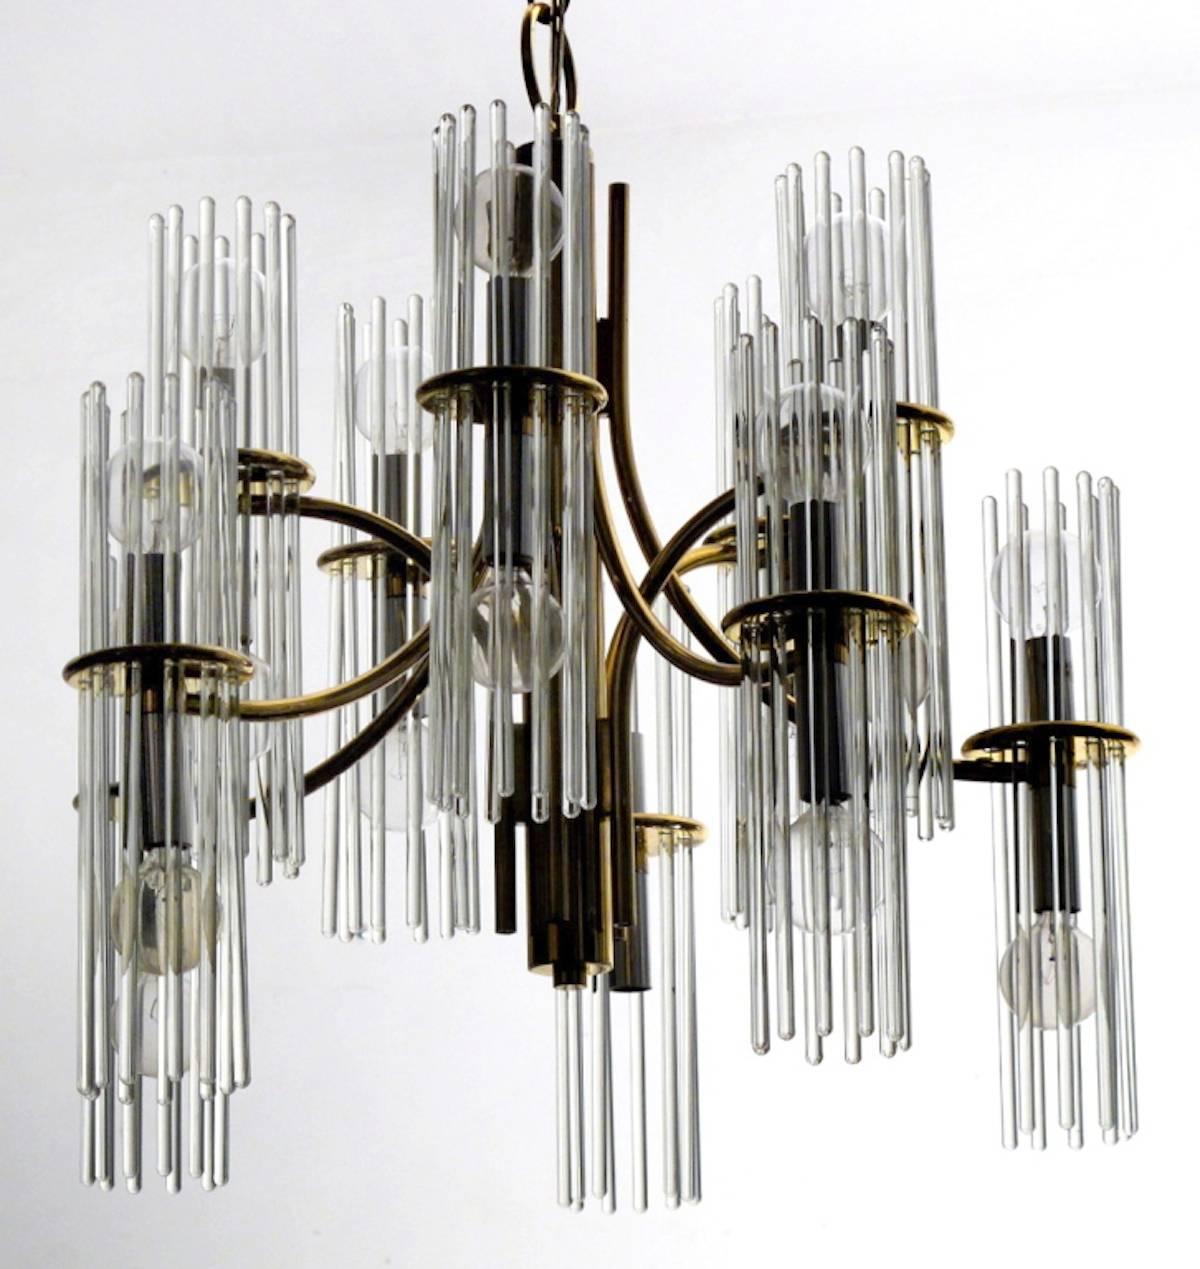 Glamorous Italian Mid-Century glass rod chandelier by Gaetano Sciolari for Lightolier, circa 1960s - 1970s. This sculptural chandelier is designed with 10 curving brass arms and 20 lights. It is in excellent pristine original condition.